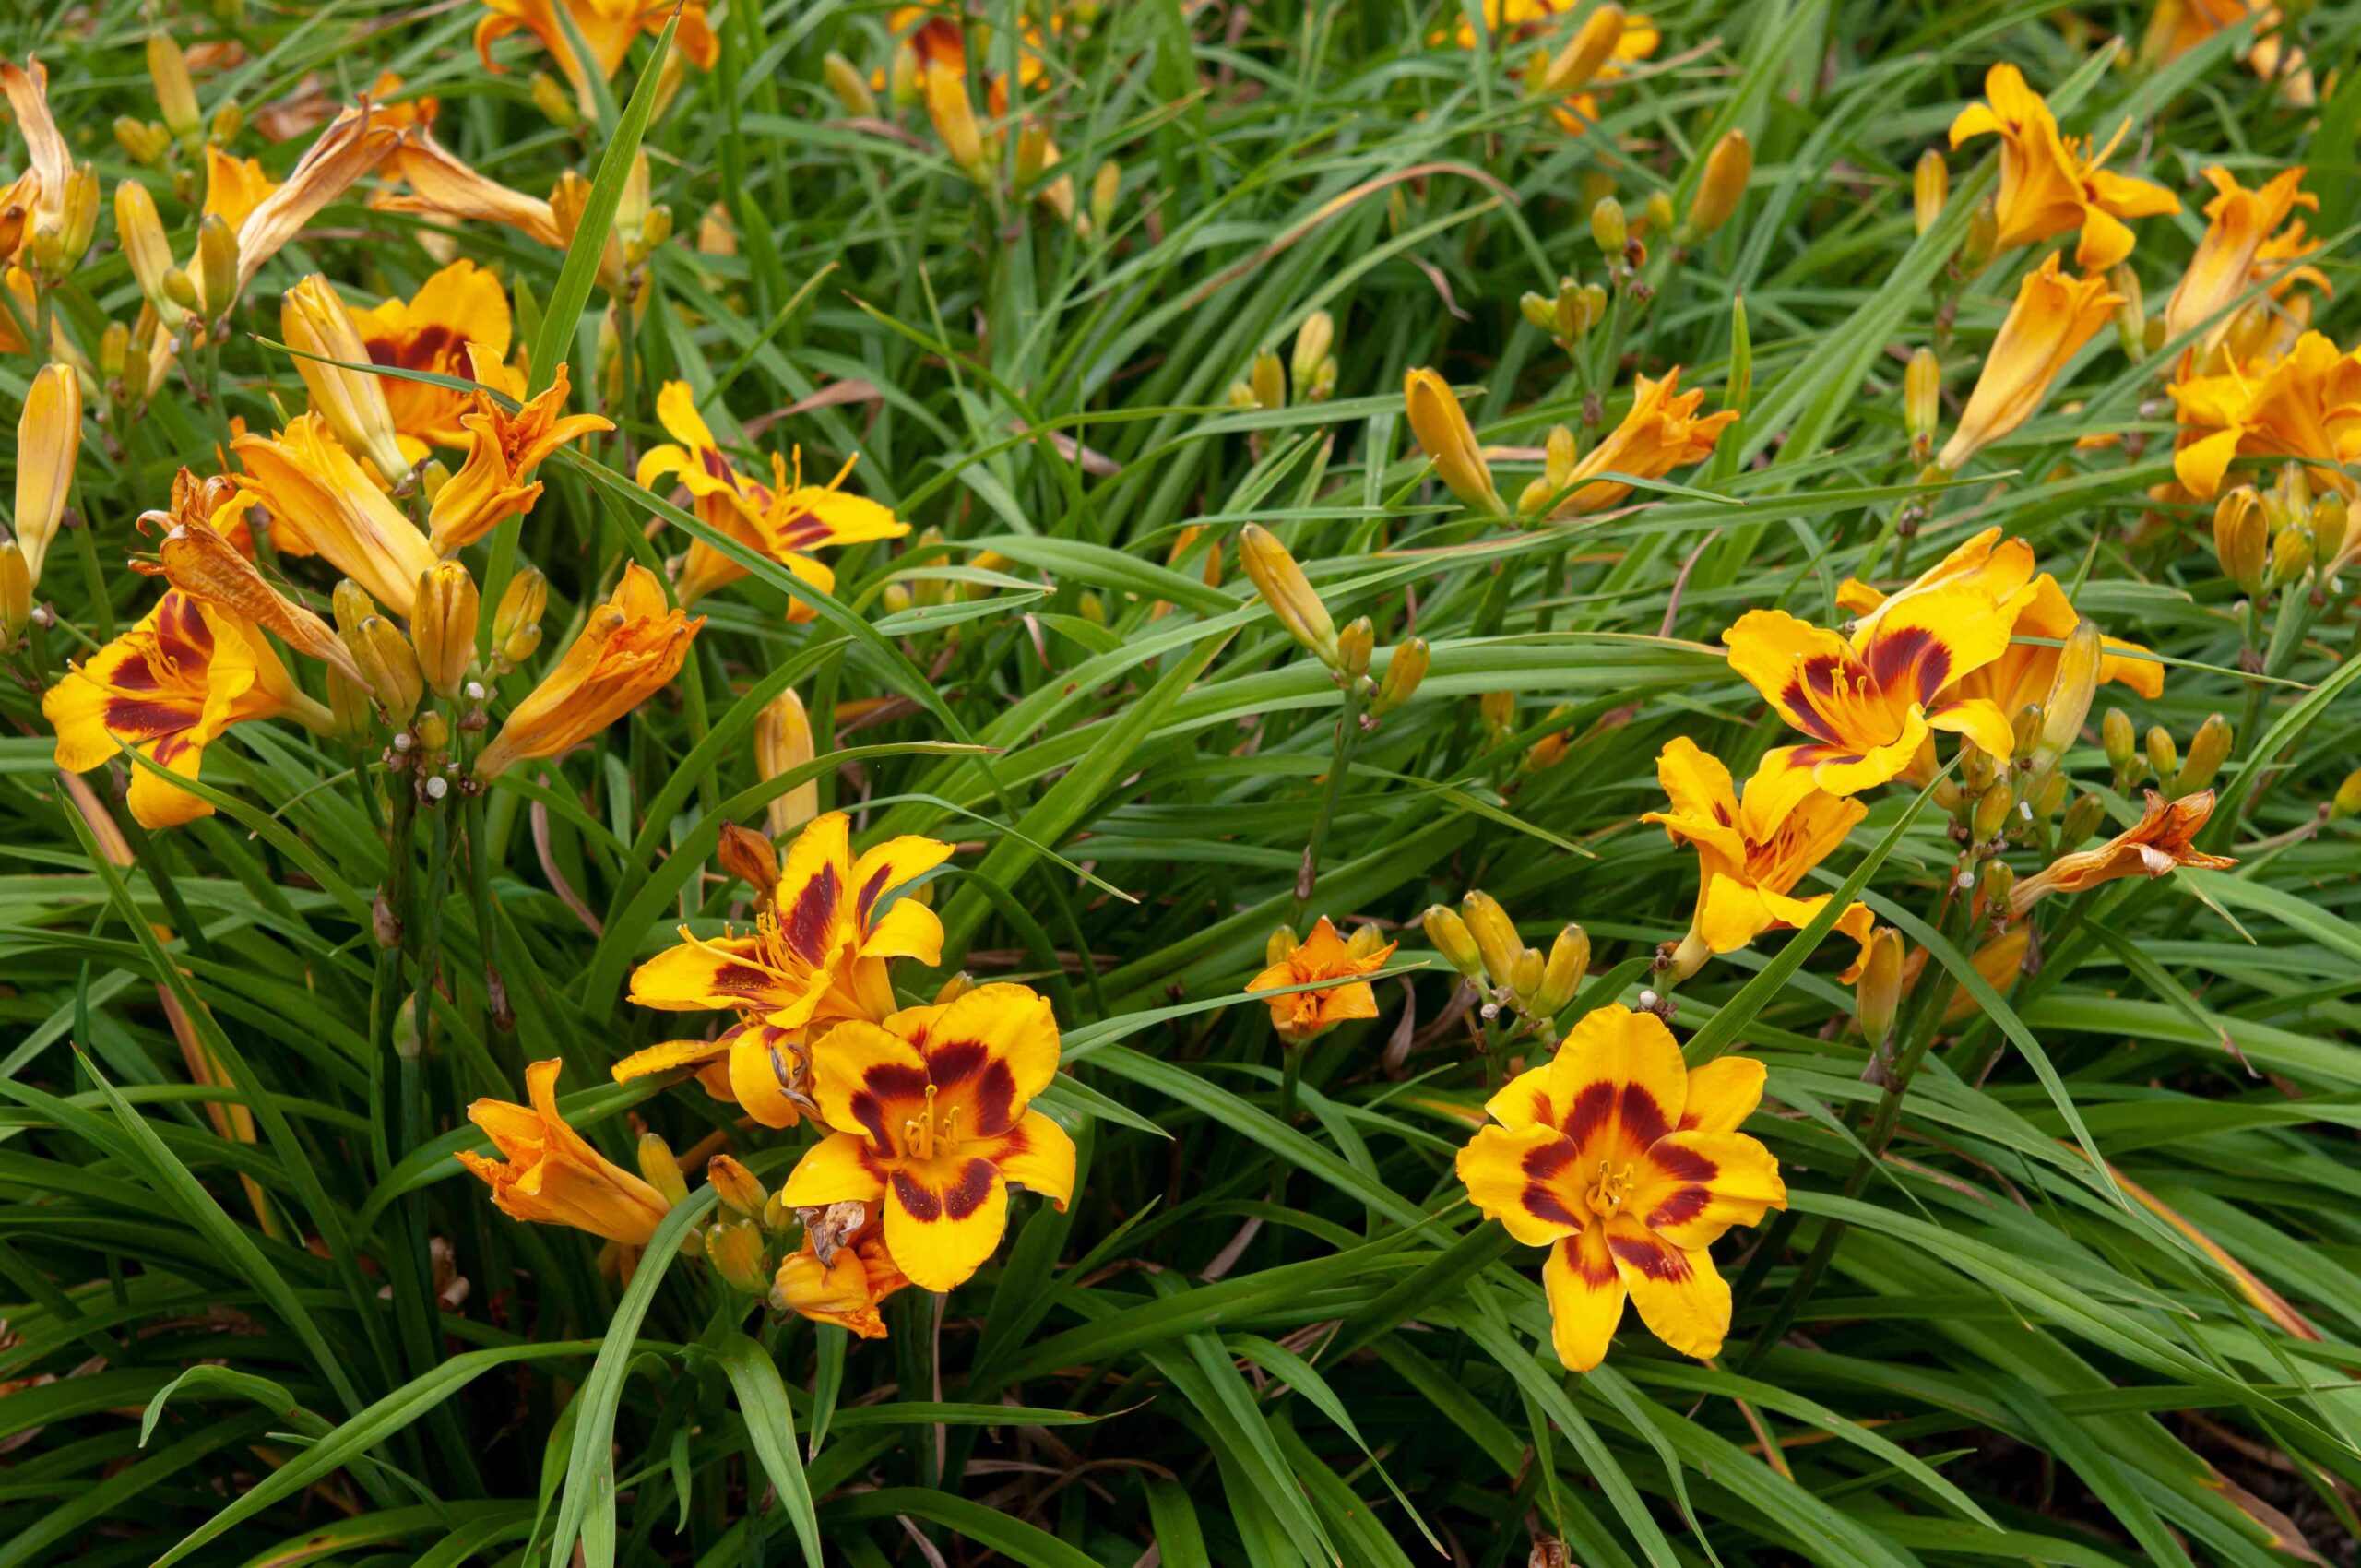 Daylilies Flowers: Bloom More Flowers at Night with These Tips